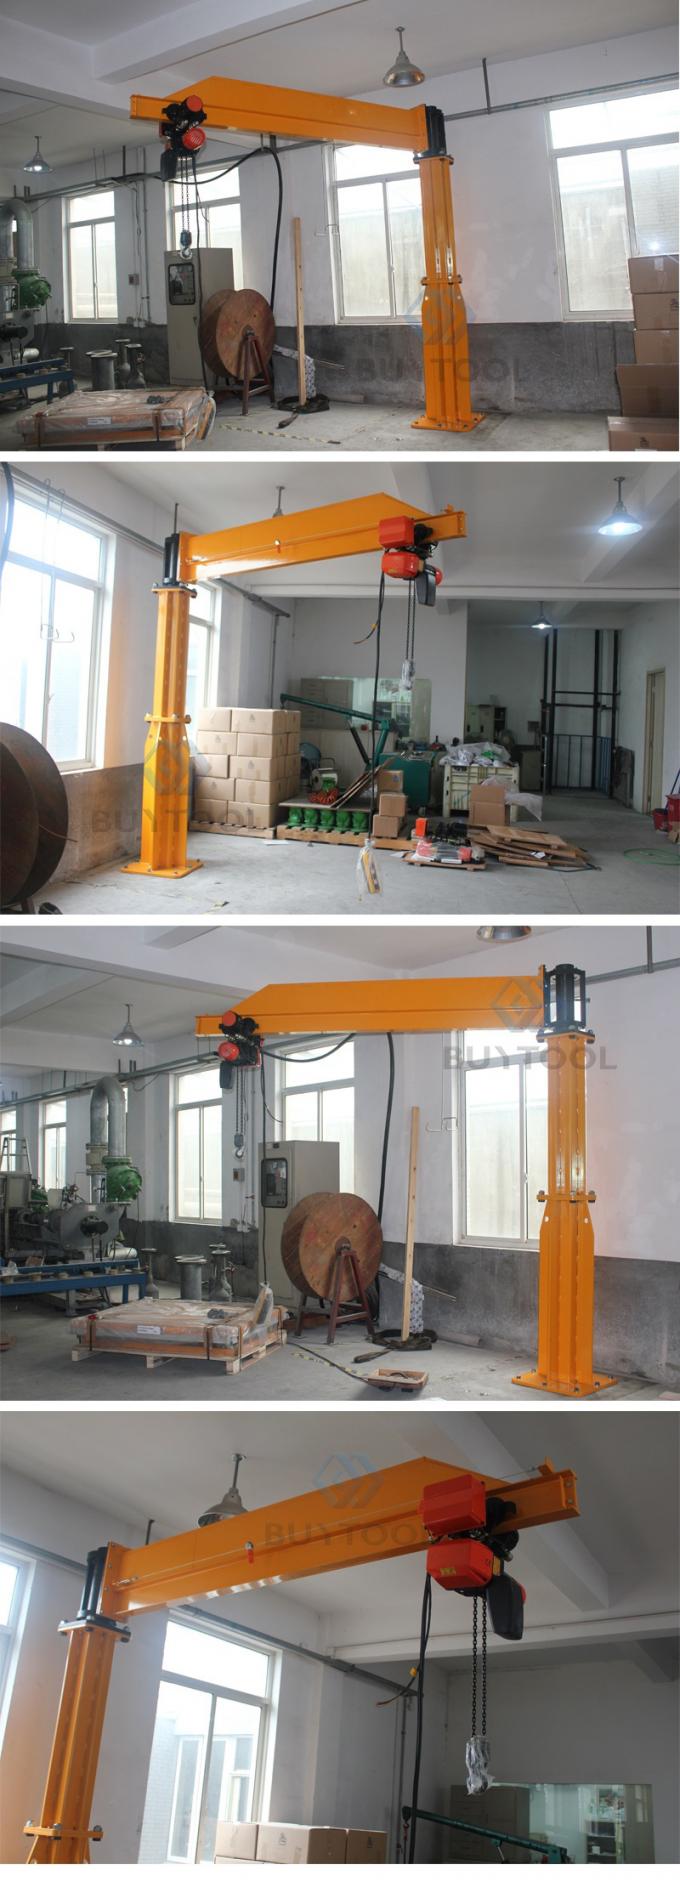 Unique Structure Safe Reliable Stationary Jib Crane Medium Sized Lifting Equipment 0